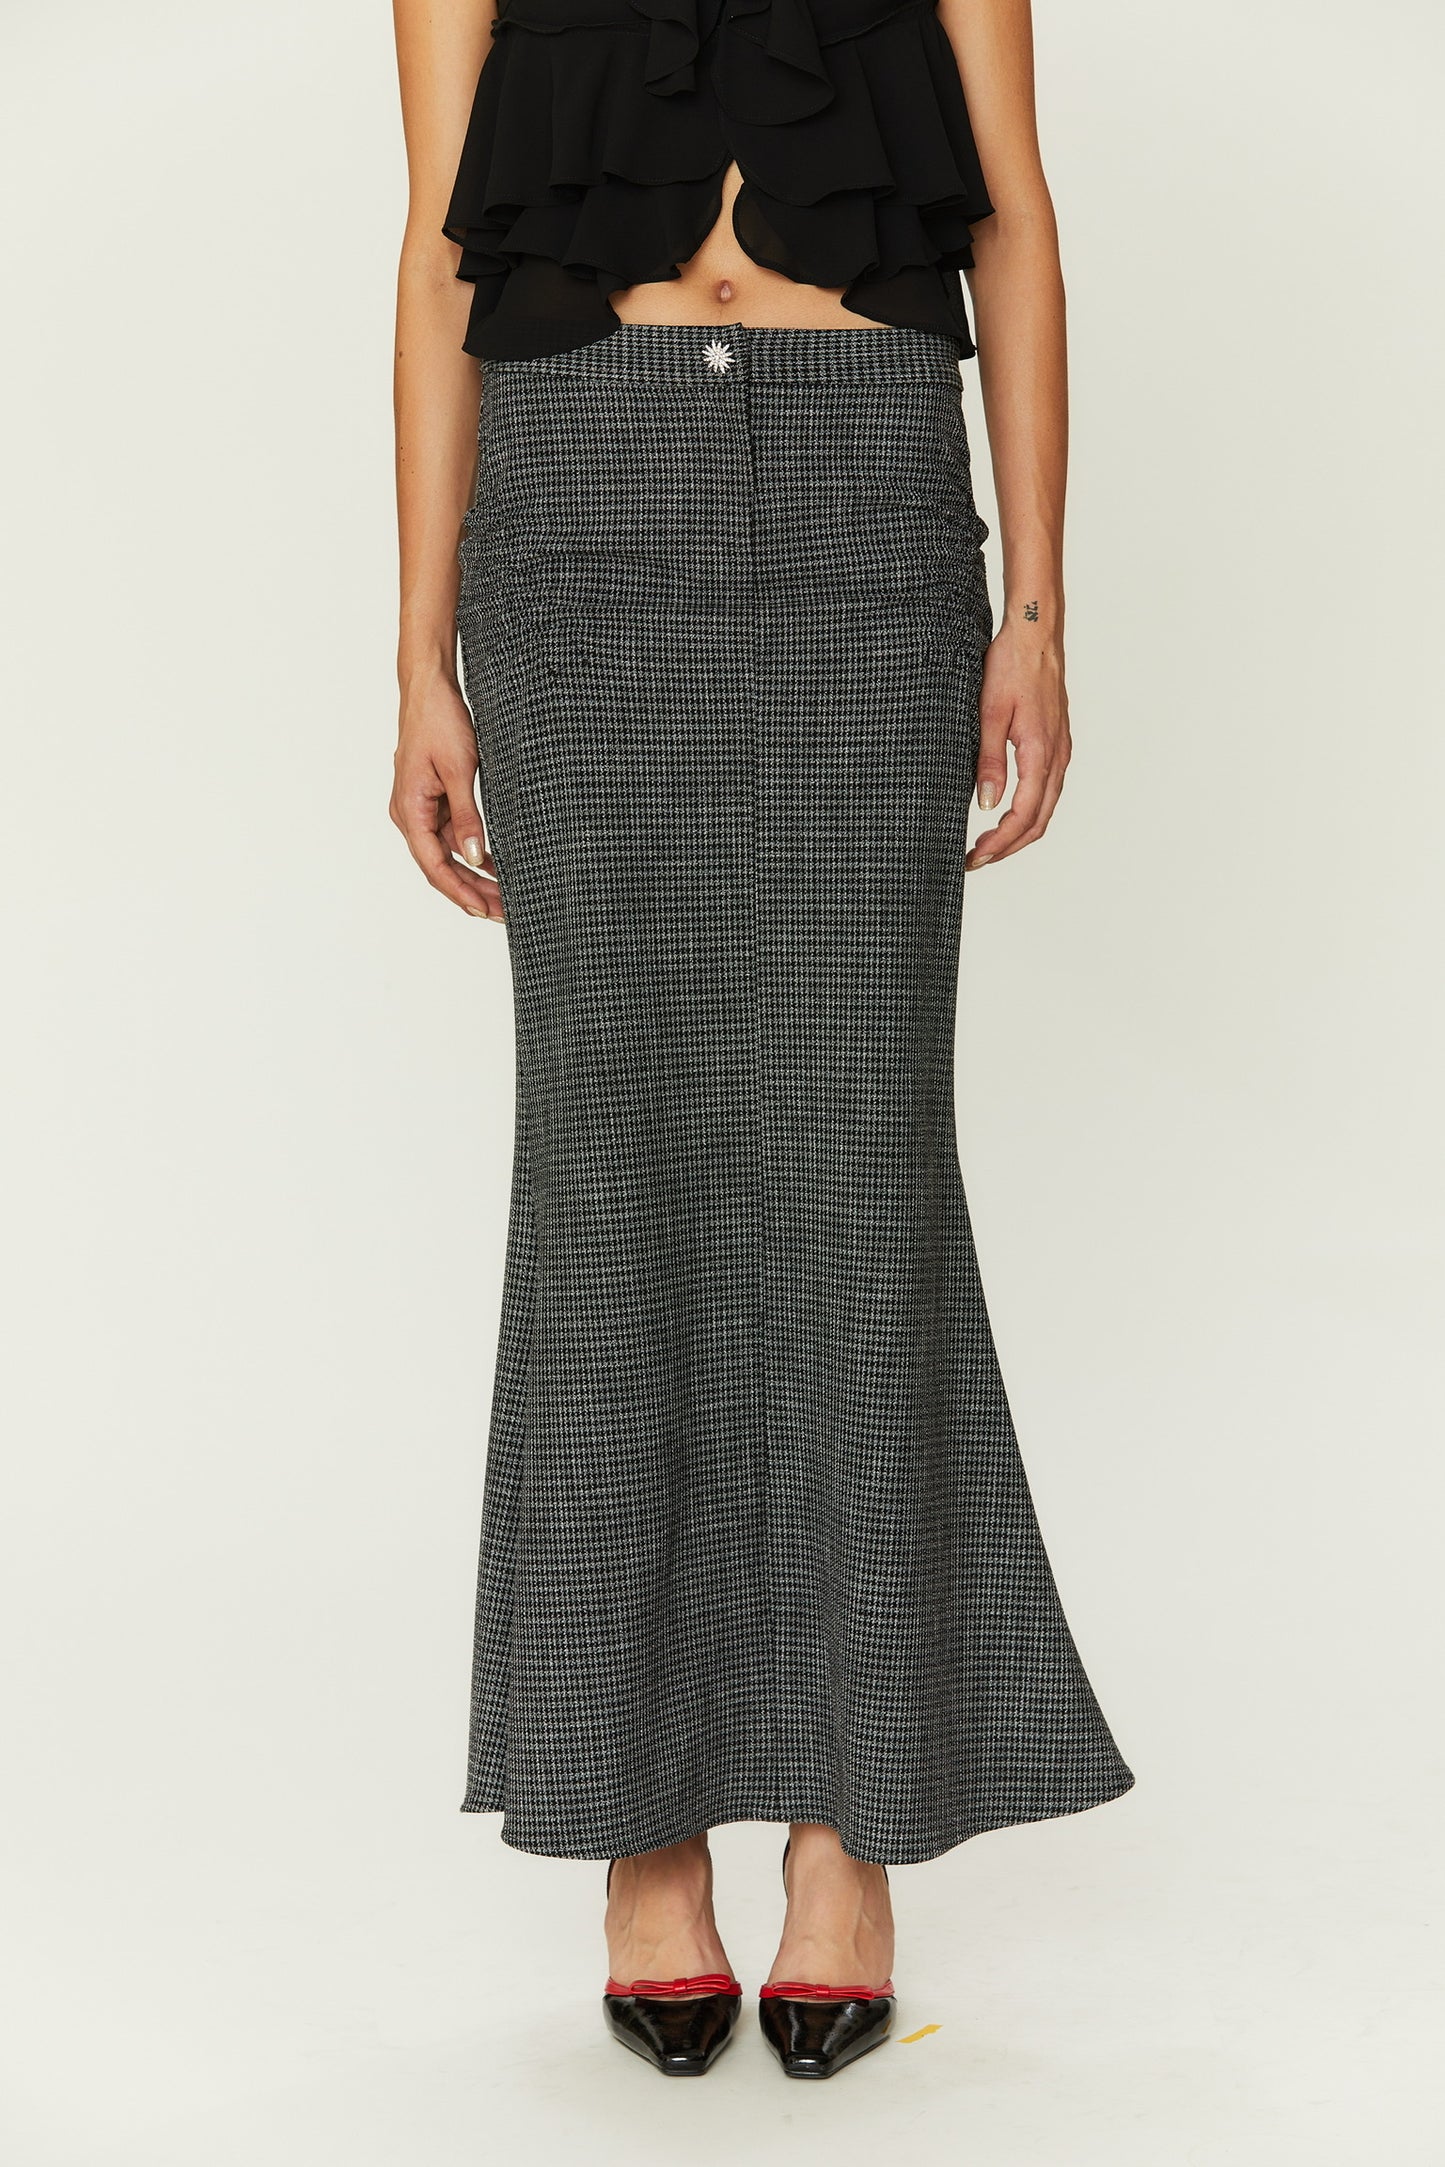 Nelly Maxi Skirt